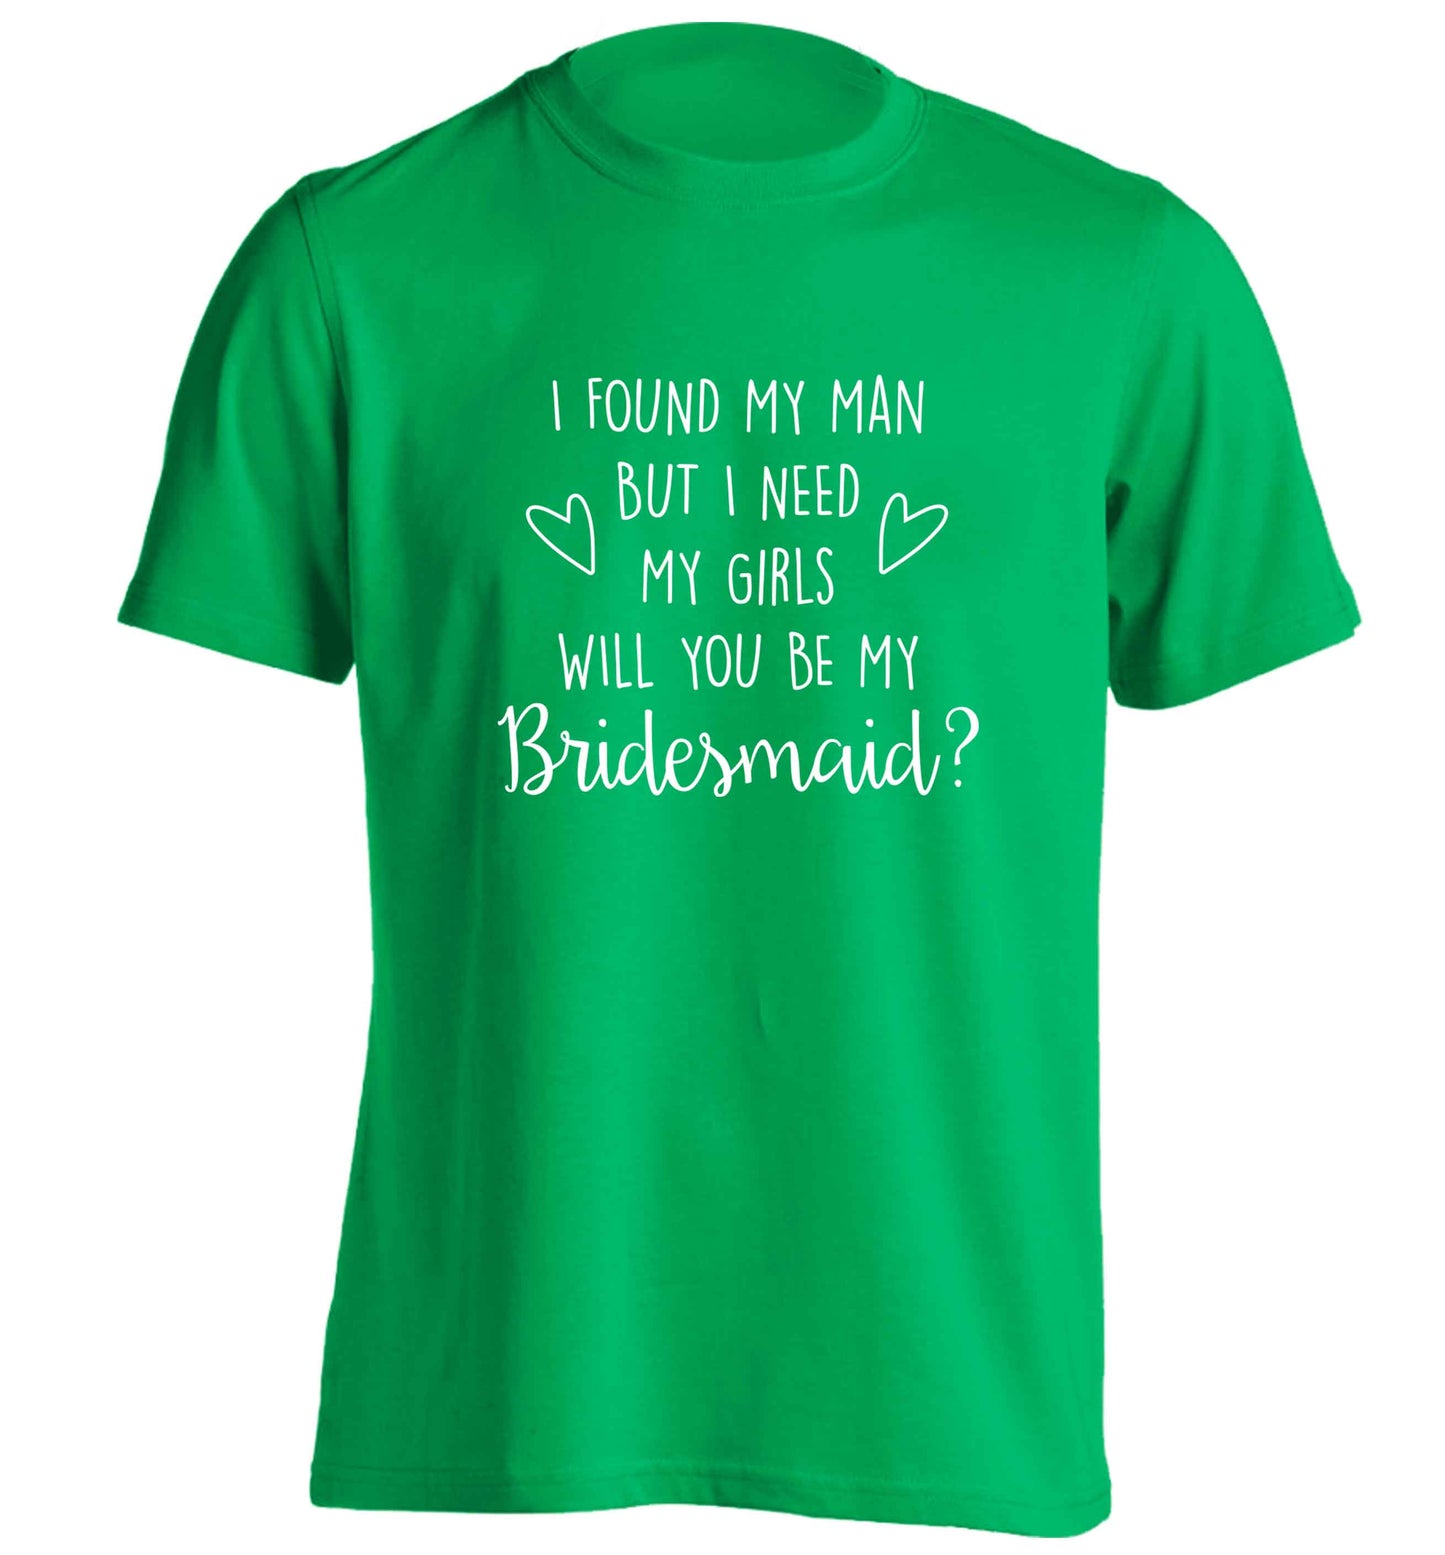 I found my man but I need my girls will you be my bridesmaid? adults unisex green Tshirt 2XL